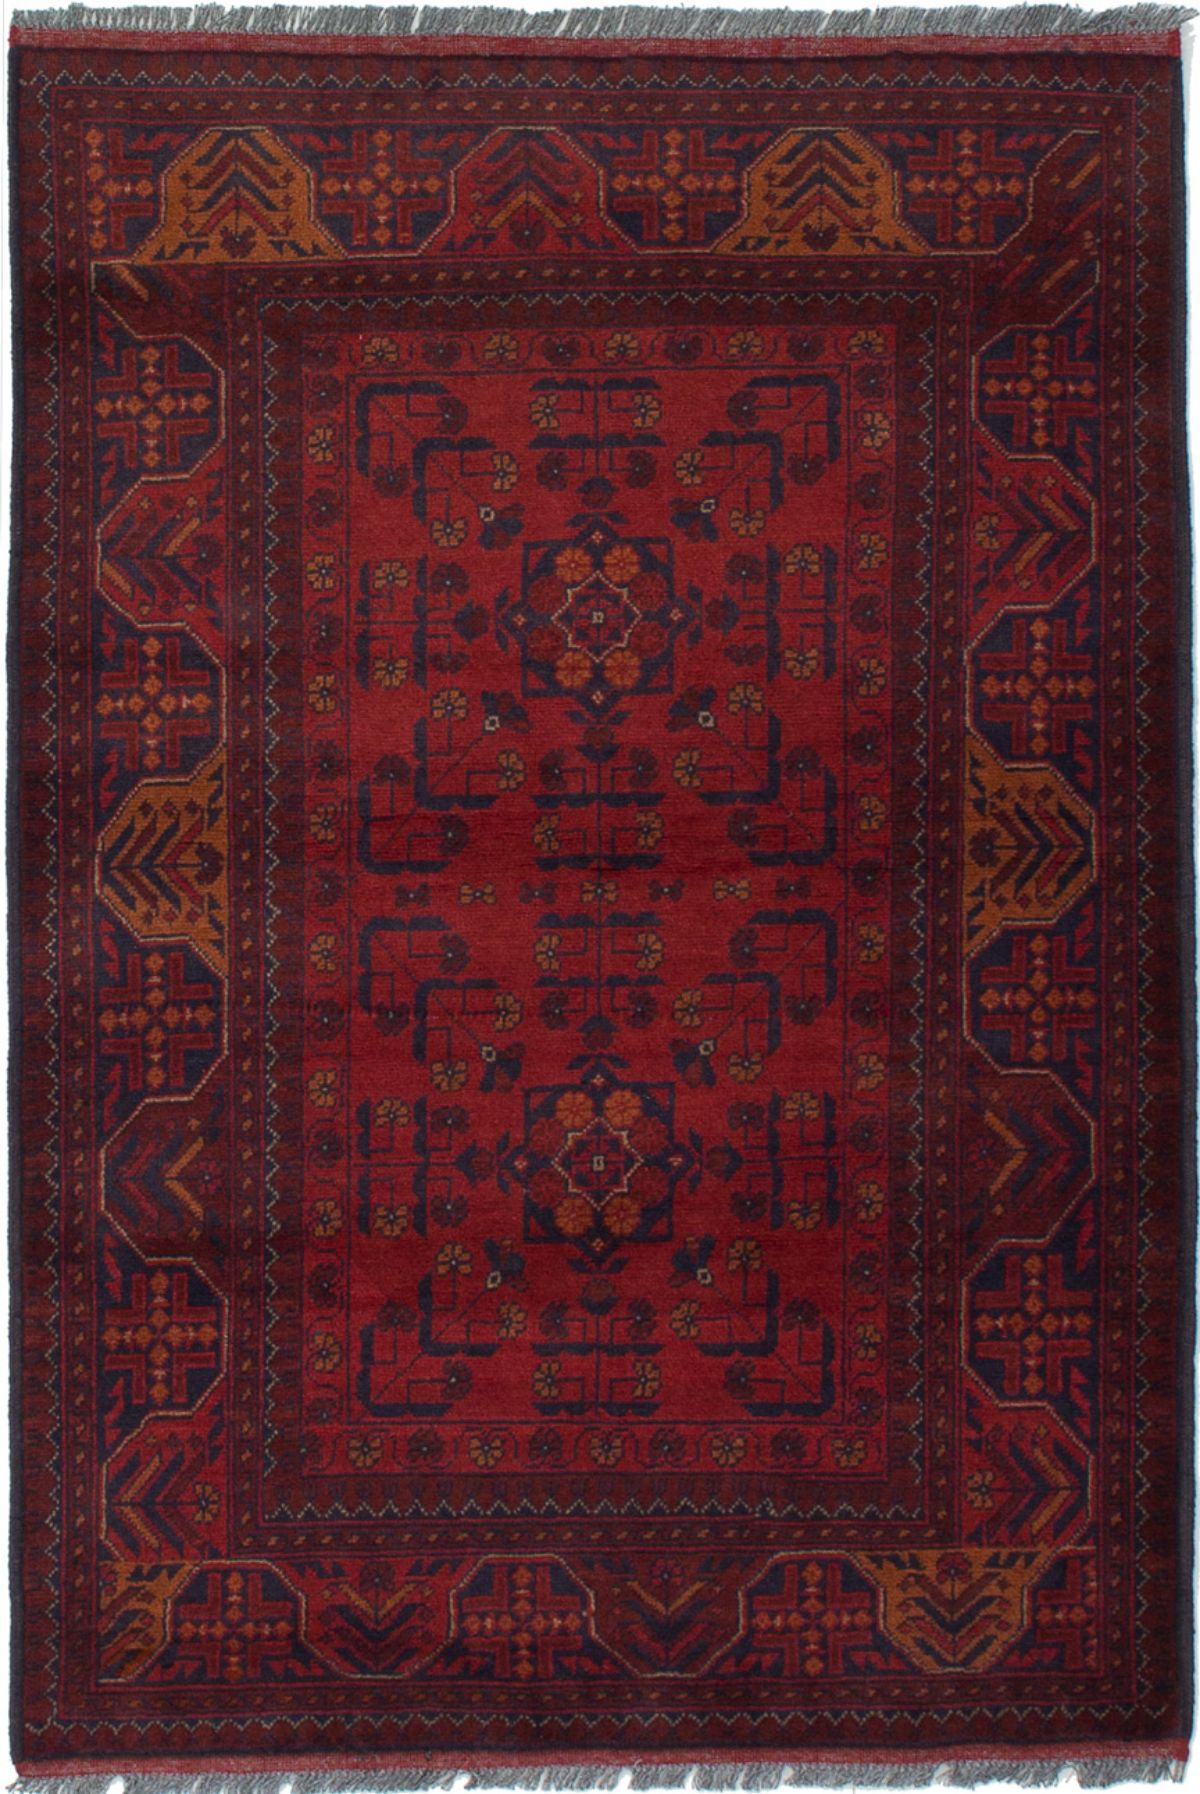 Hand-knotted Finest Khal Mohammadi Red Wool Rug 3'3" x 4'10" (26) Size: 3'3" x 4'10"  